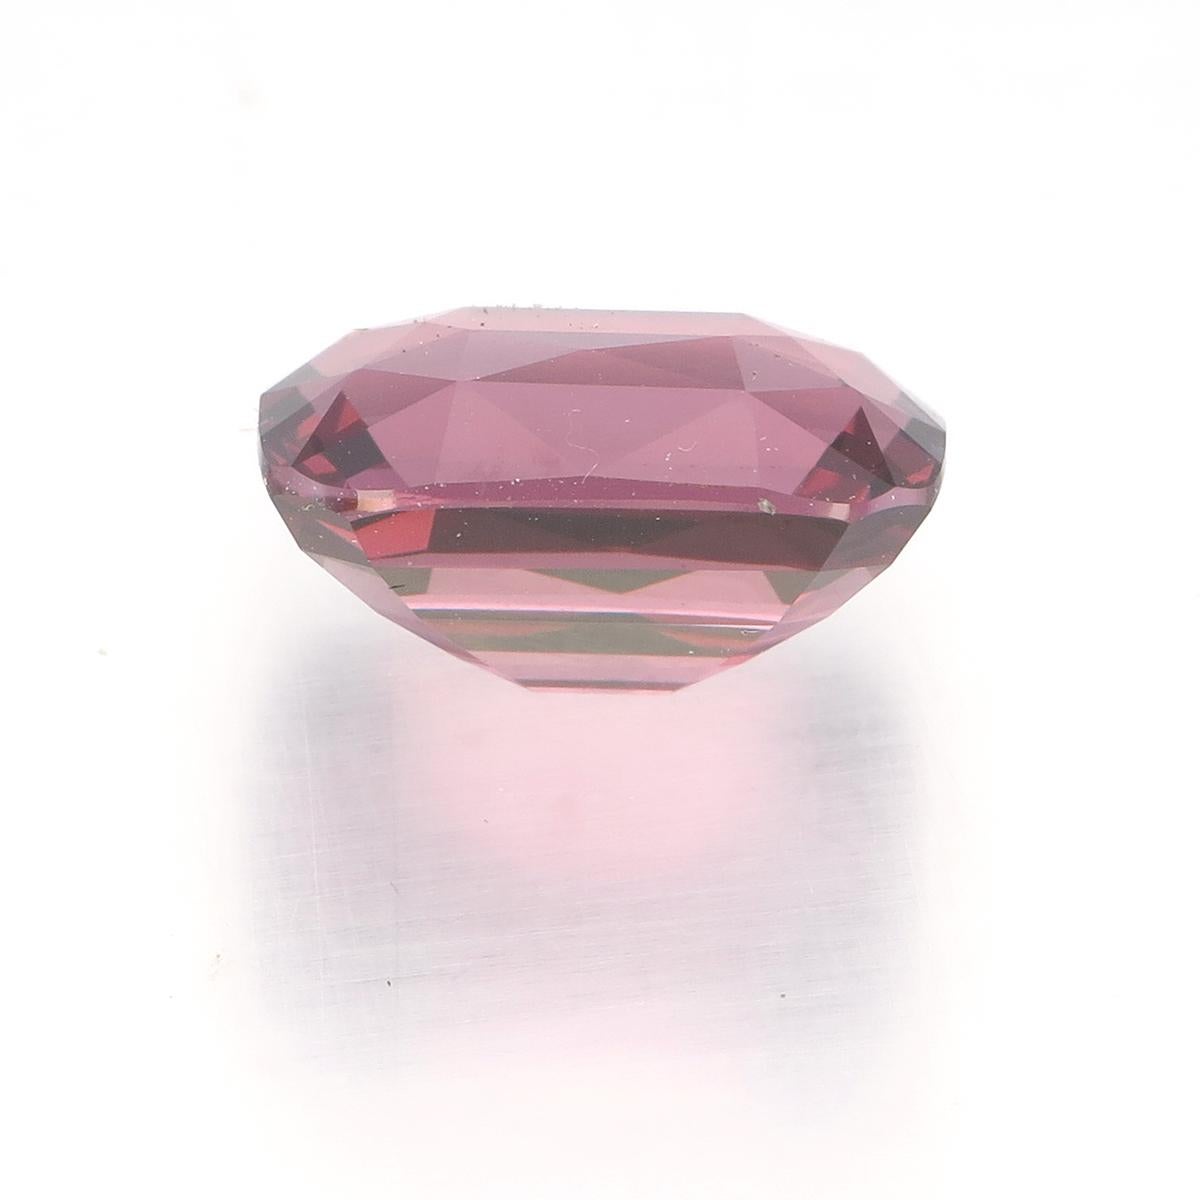 An absolutely sensational 6.40 carat pinkish red spinel.
Spinels with both this weight and clarity are incredibly valuable and rare.
The stone is so clear that deciding on the origin was not possible,
As noted by the Lotus Gemology Lab:
       